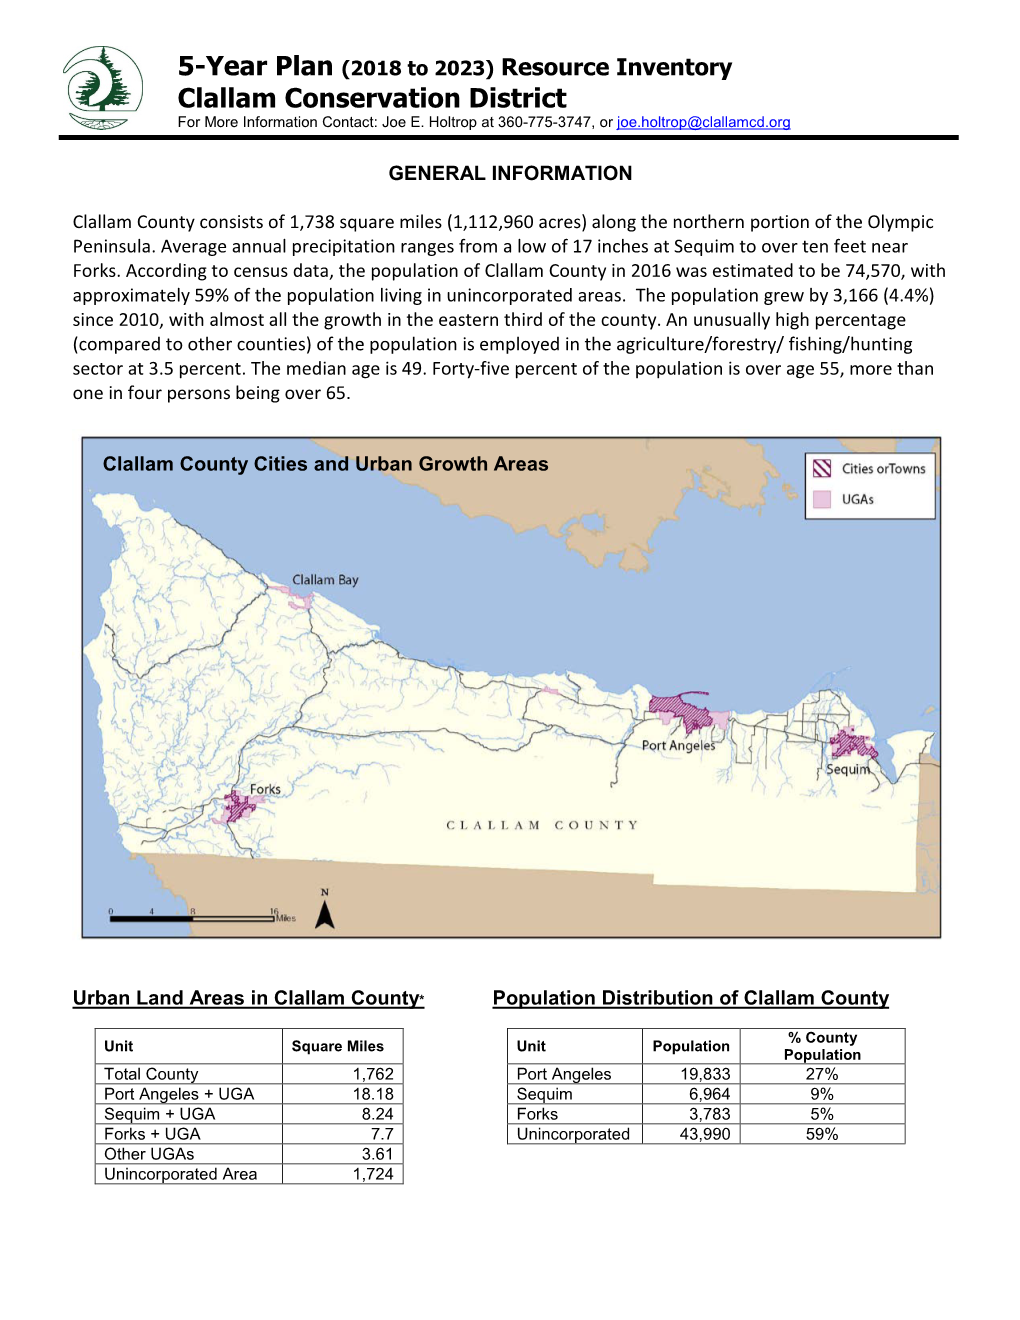 5-Year Plan (2018 to 2023) Resource Inventory Clallam Conservation District for More Information Contact: Joe E